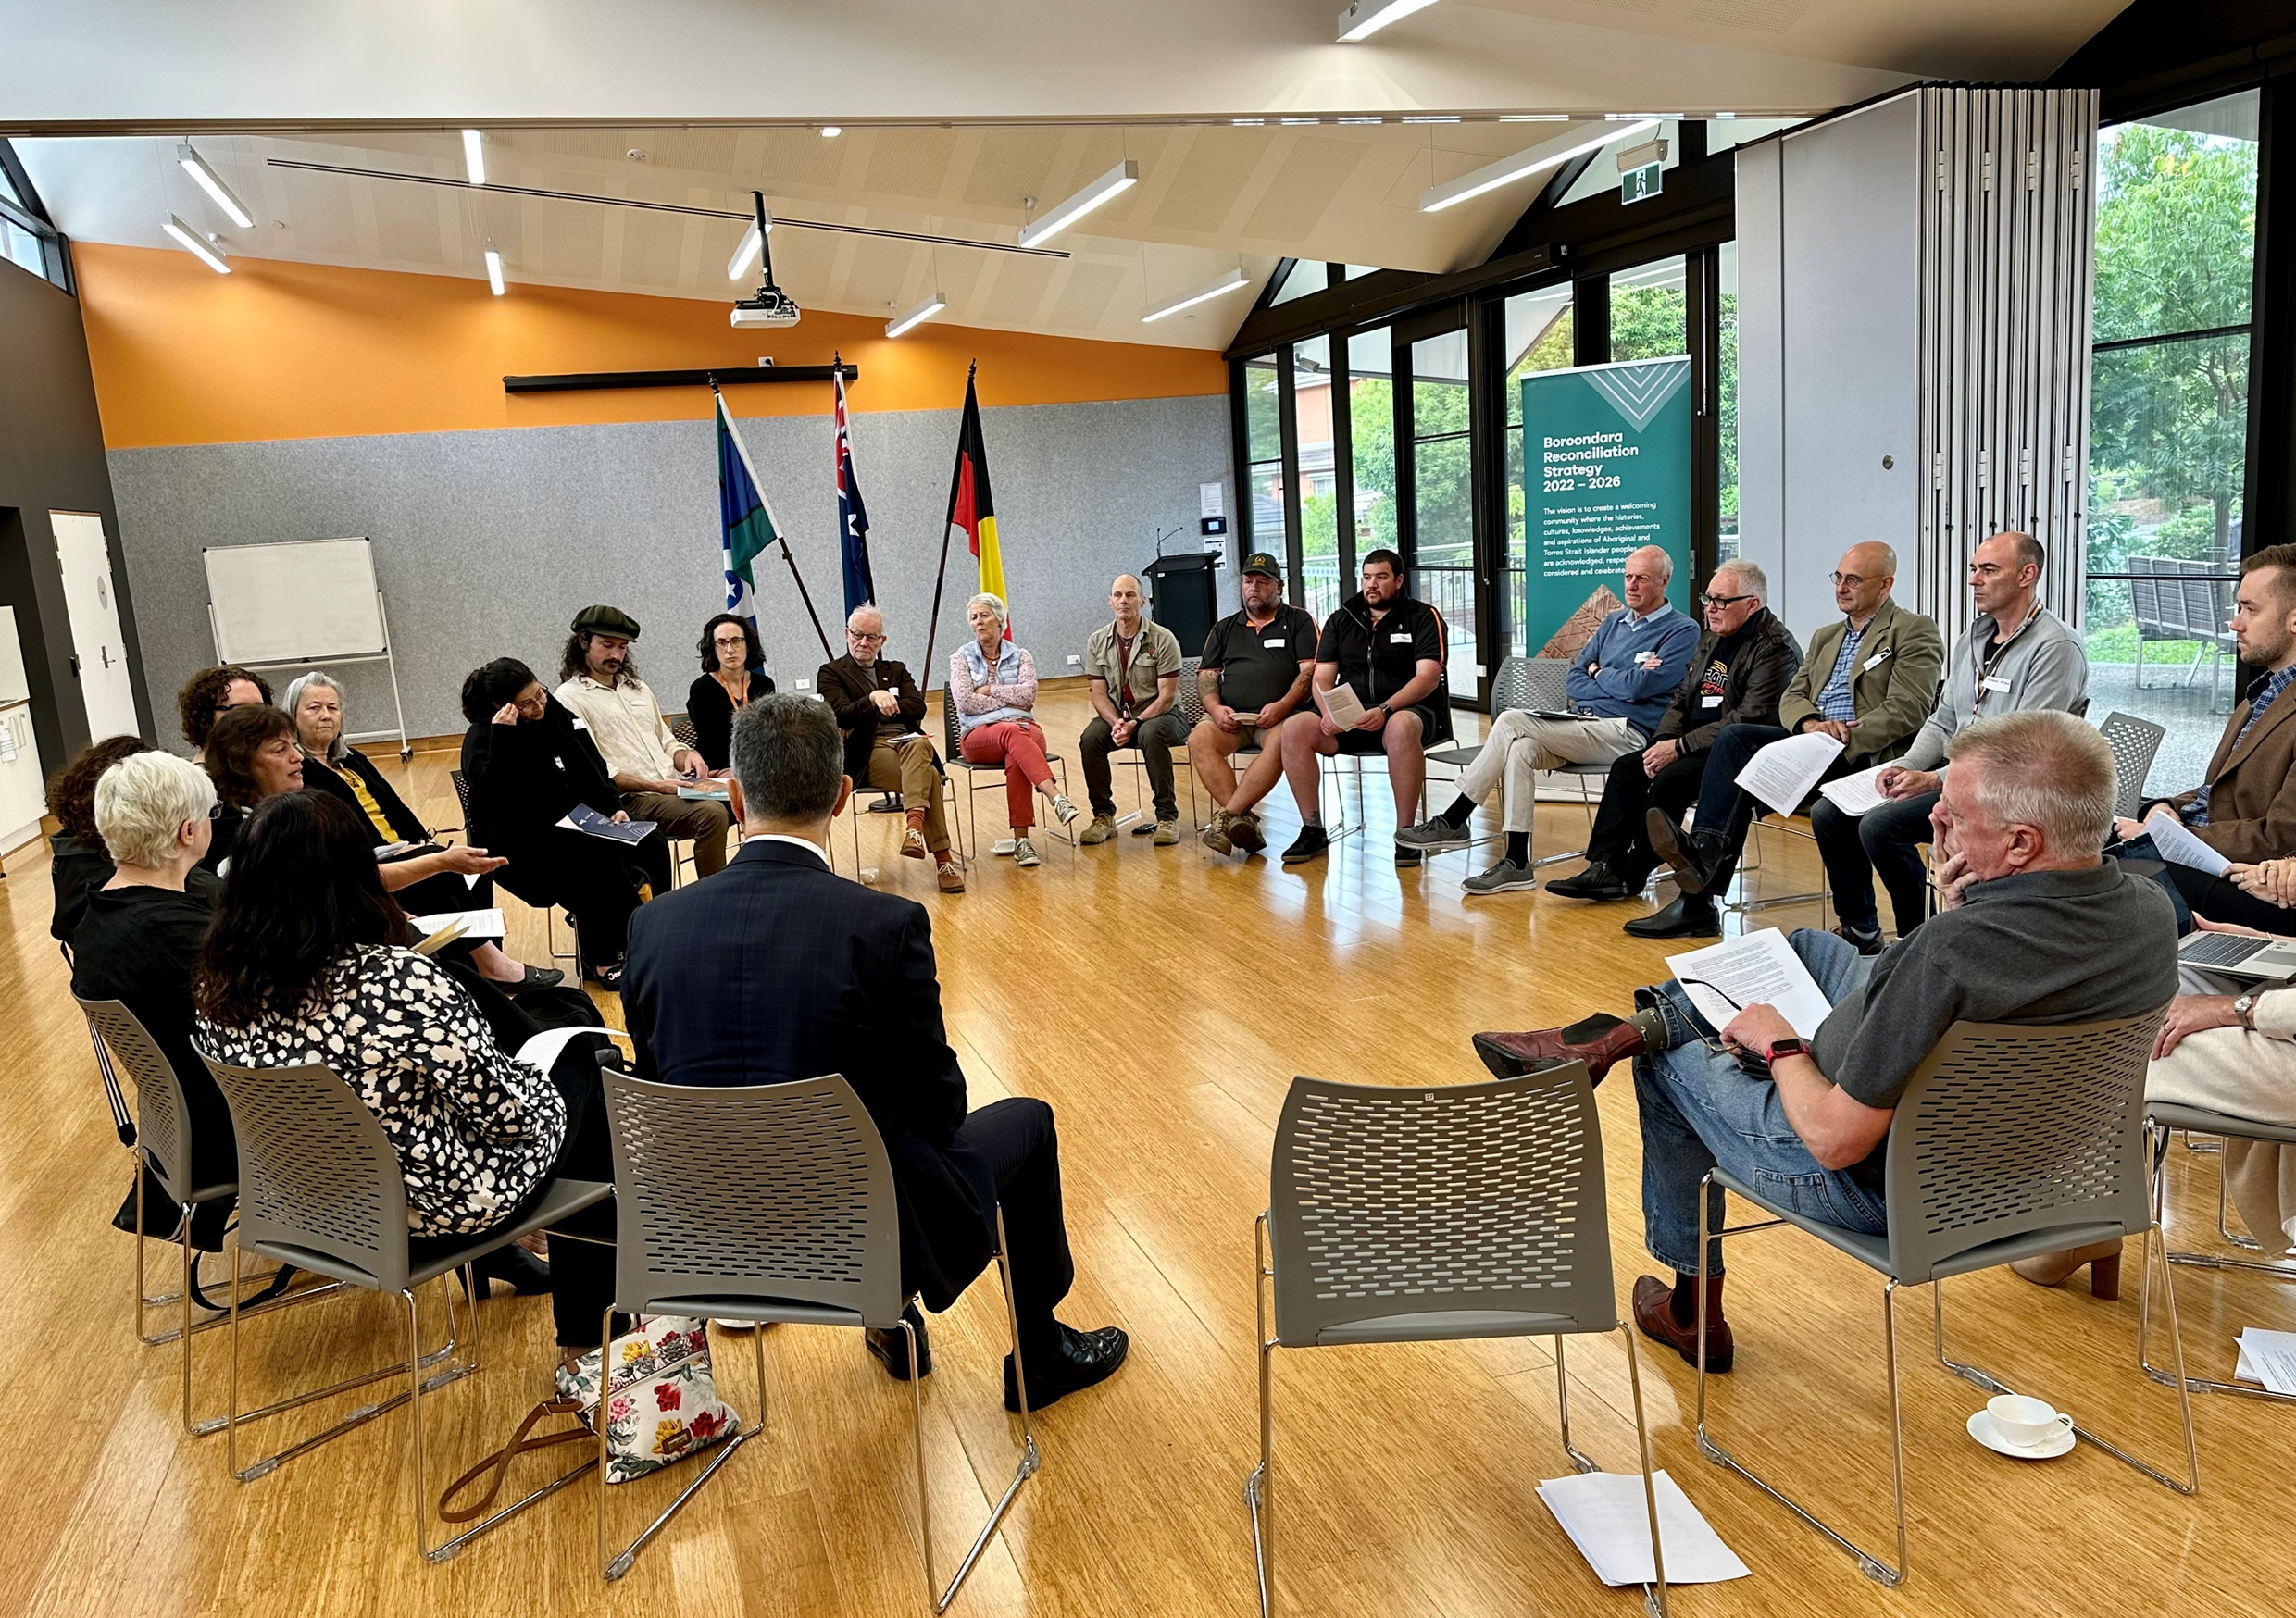 A group of people sitting indoors in a circle on chairs, with the Australian flag, Torres Strait Islander flag, and Aboriginal flag behinf them.